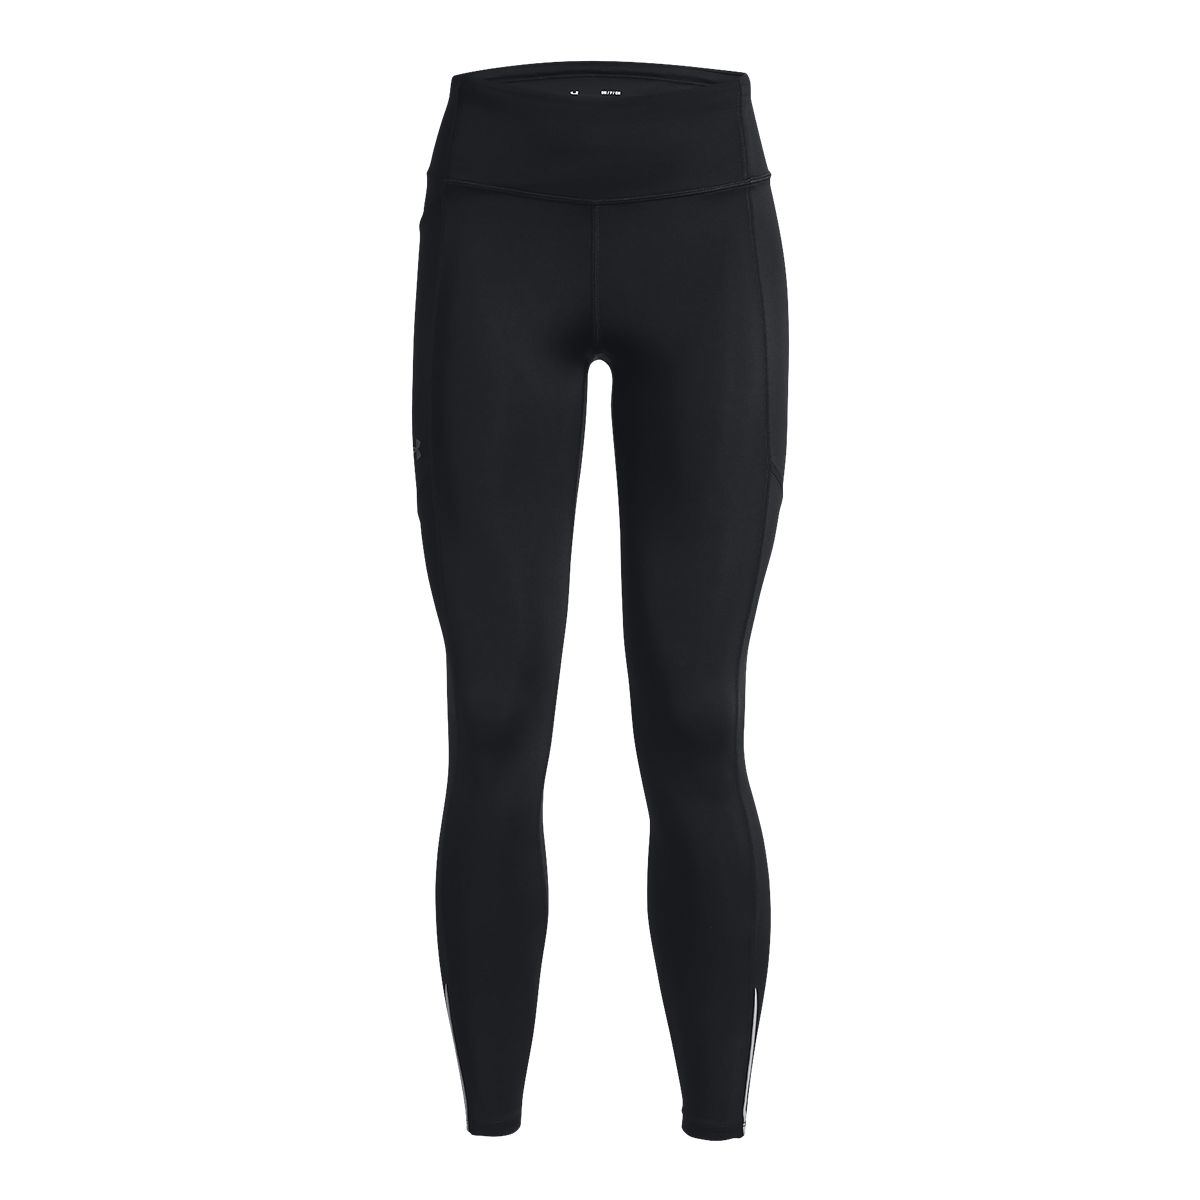 https://media-www.sportchek.ca/product/div-03-softgoods/dpt-70-athletic-clothing/sdpt-02-womens/333633837/ua-w-run-fly-fast-3-0-tight-9d8f53f0-b5fd-4715-9279-a01fdf79d50d-jpgrendition.jpg?imdensity=1&imwidth=640&impolicy=mZoom